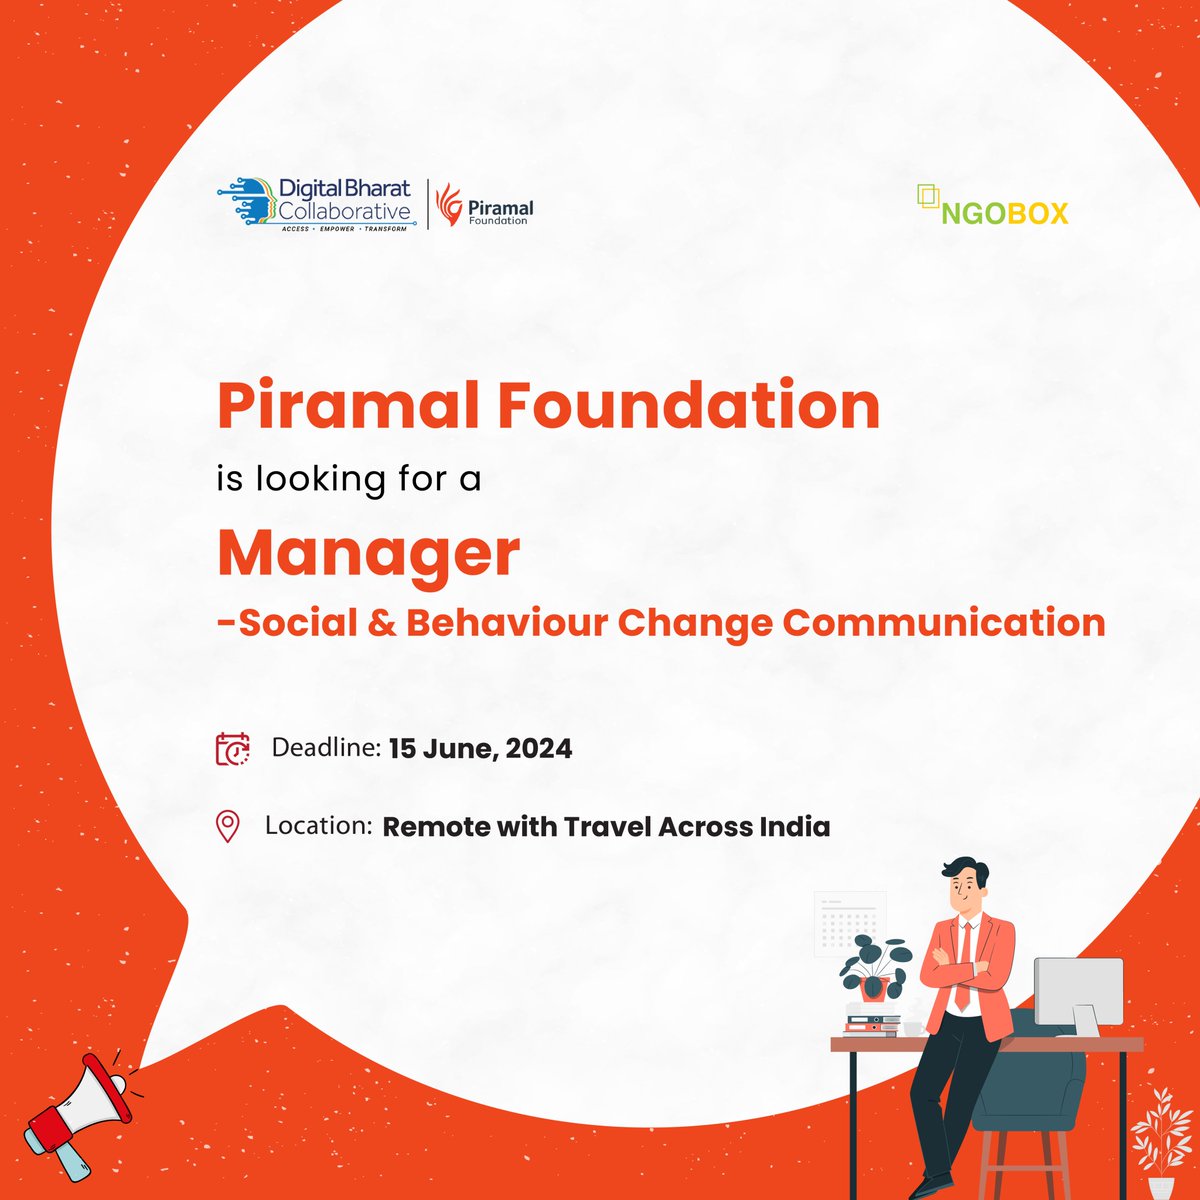 🌟 Exciting opportunity alert! @PiramalFdn is on the lookout for a Manager in Social & Behaviour Change Communication! Location: Remote with Travel Across India. Deadline: June 15, 2024. Apply now: ngobox.org/job-detail_Man… #JobOpening #Manager #SocialChange #Communication